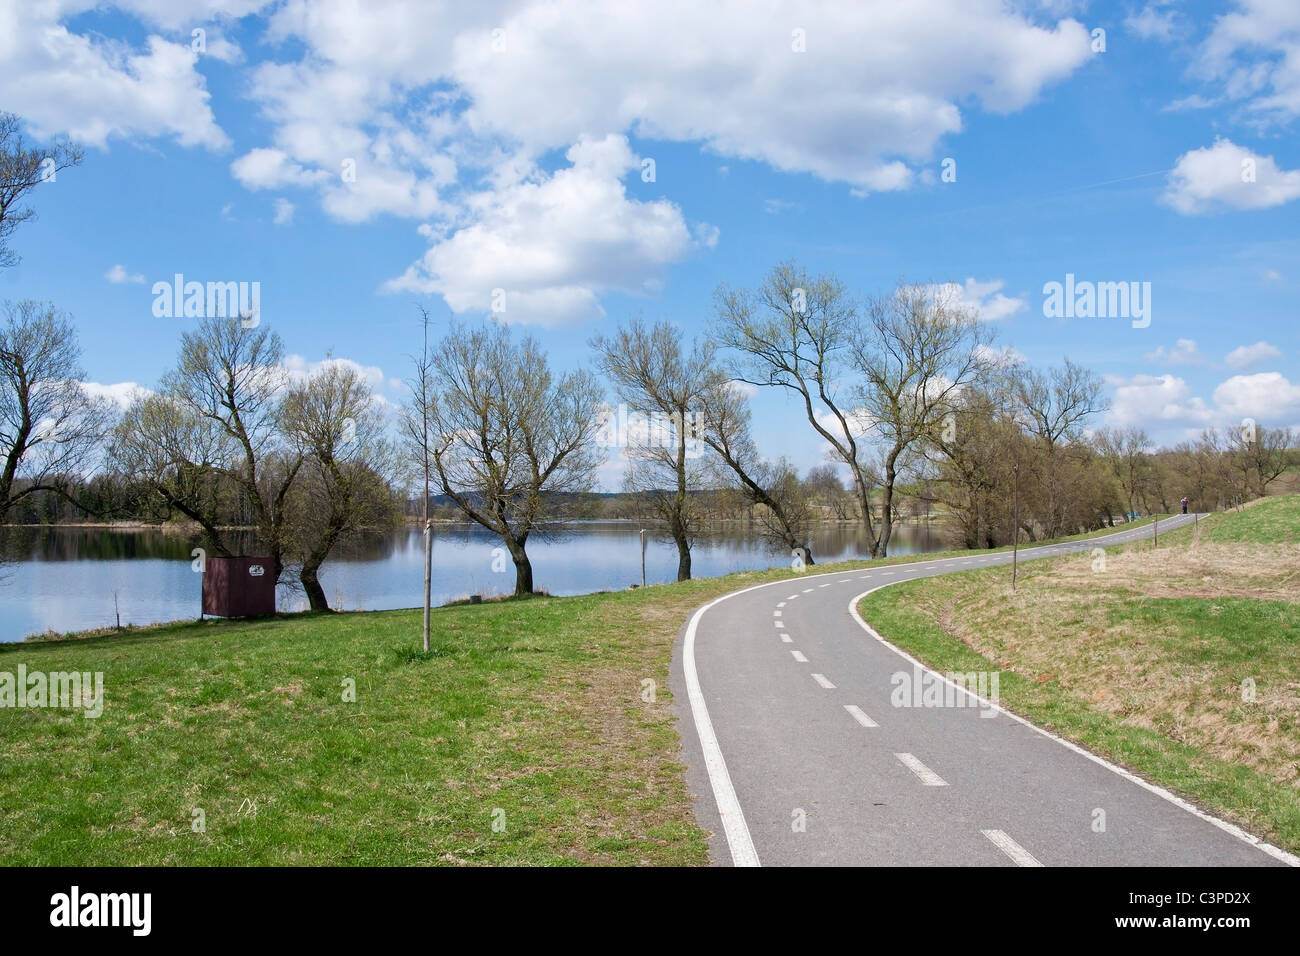 Grey sinuous bicycle path in the park Stock Photo